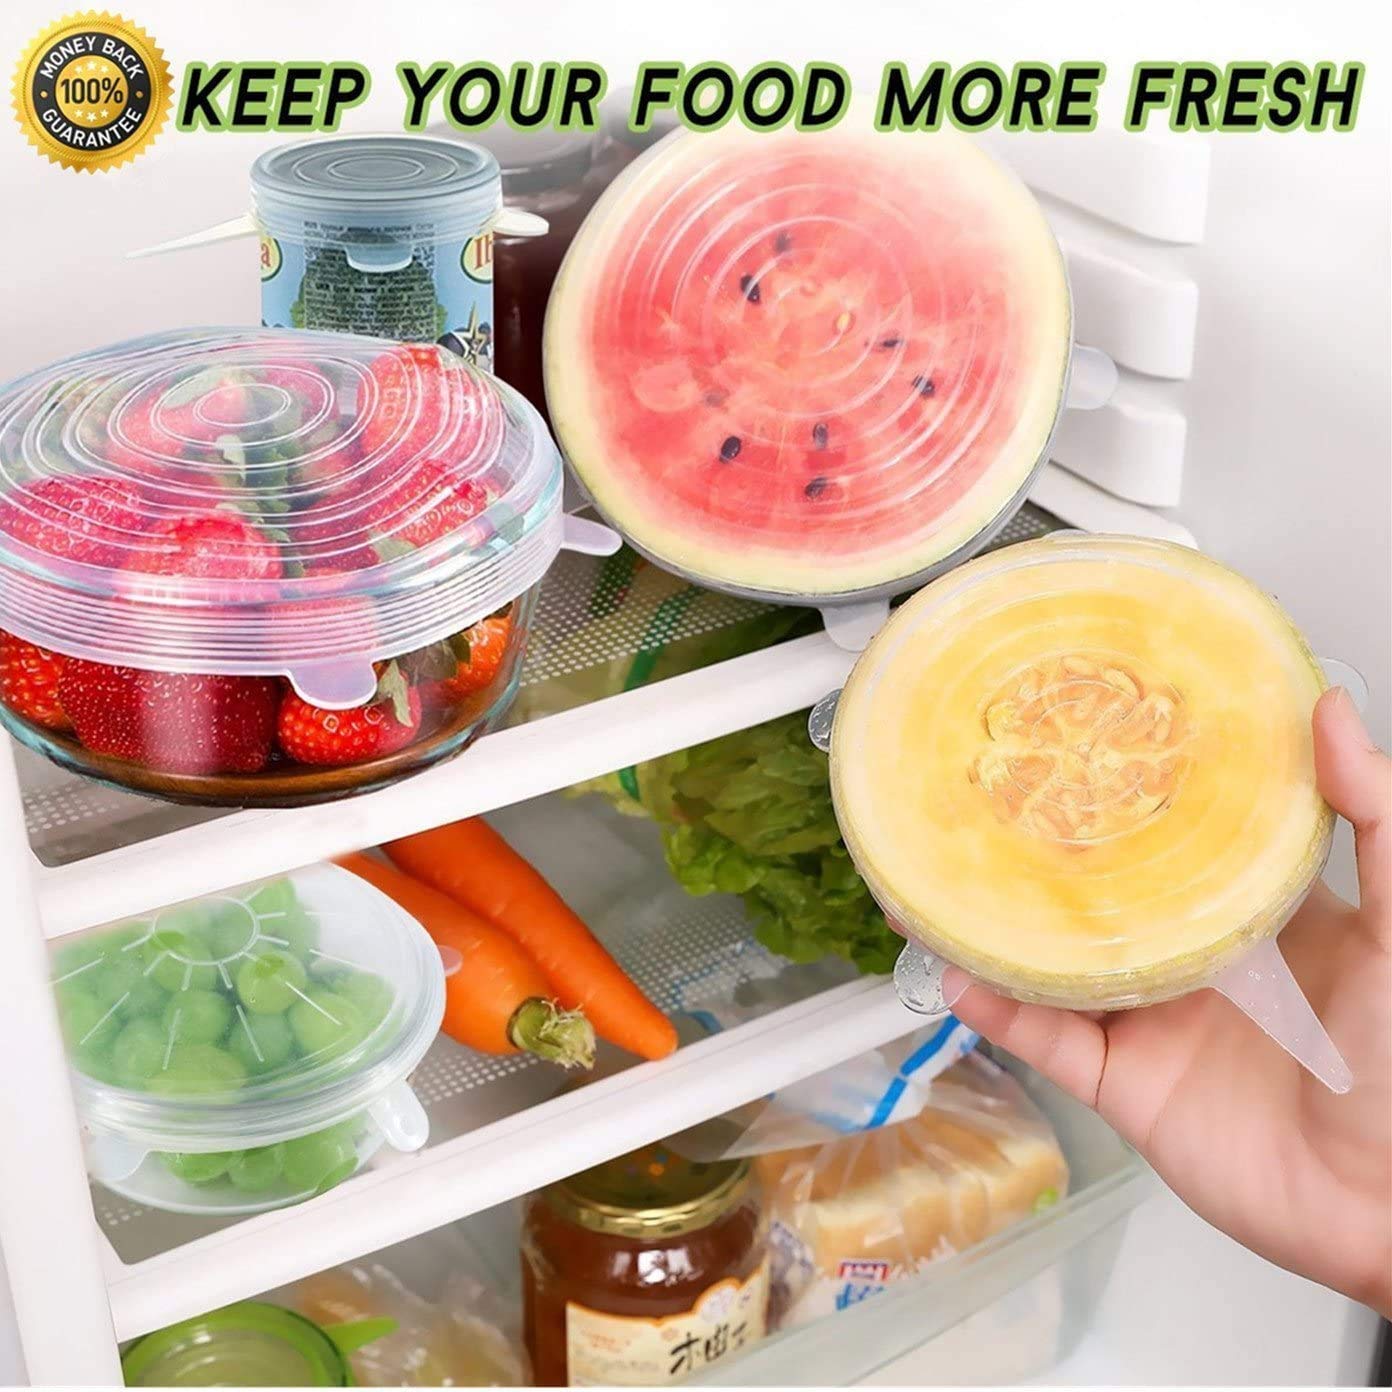 JIGUOOR Silicone Stretch Lids, 6 Pack Reusable Silicone Lids, Durable Food Storage Silicone Covers for Bowl, 6 Sizes to Meet Most Containers to Keep Food Fresh, Microwave Safe - Easy Clean